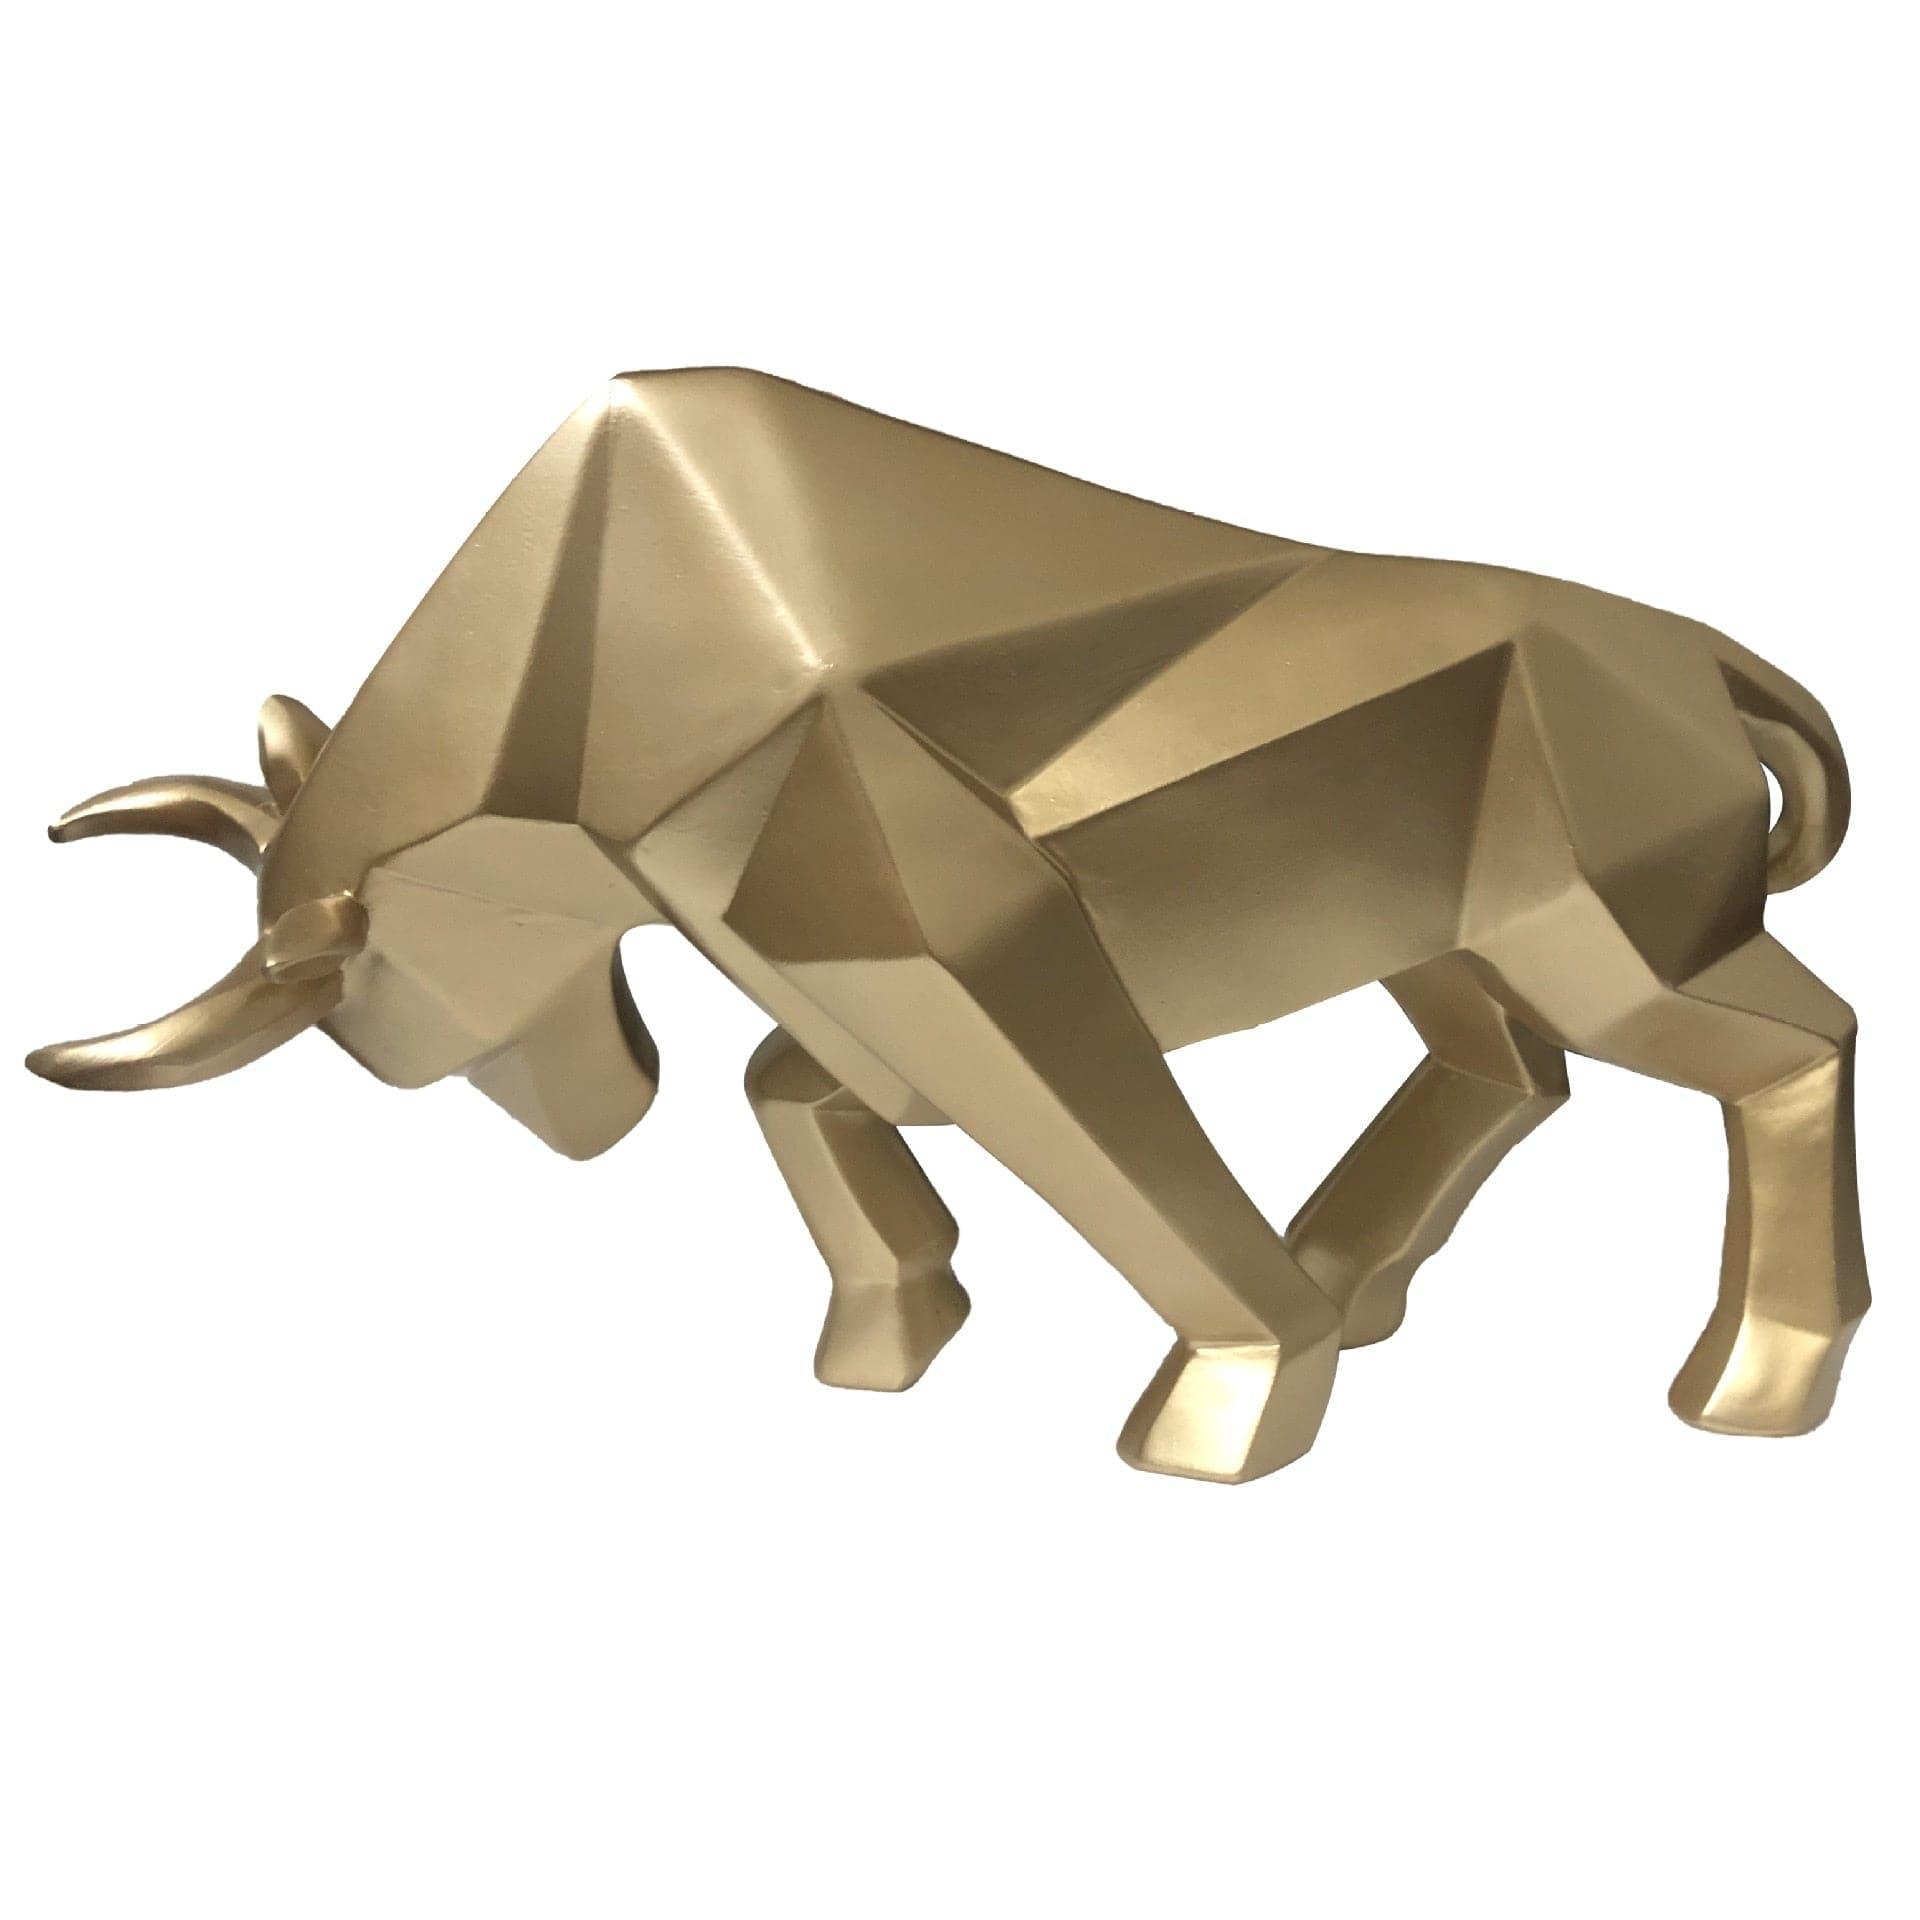 Shop 0 A-gold Bull Statues Art Geometric Resin Bison Sculpture Animal Home Decoration Tabletop Ox Figurine Ornament Office Crafts Decor Gifts Mademoiselle Home Decor